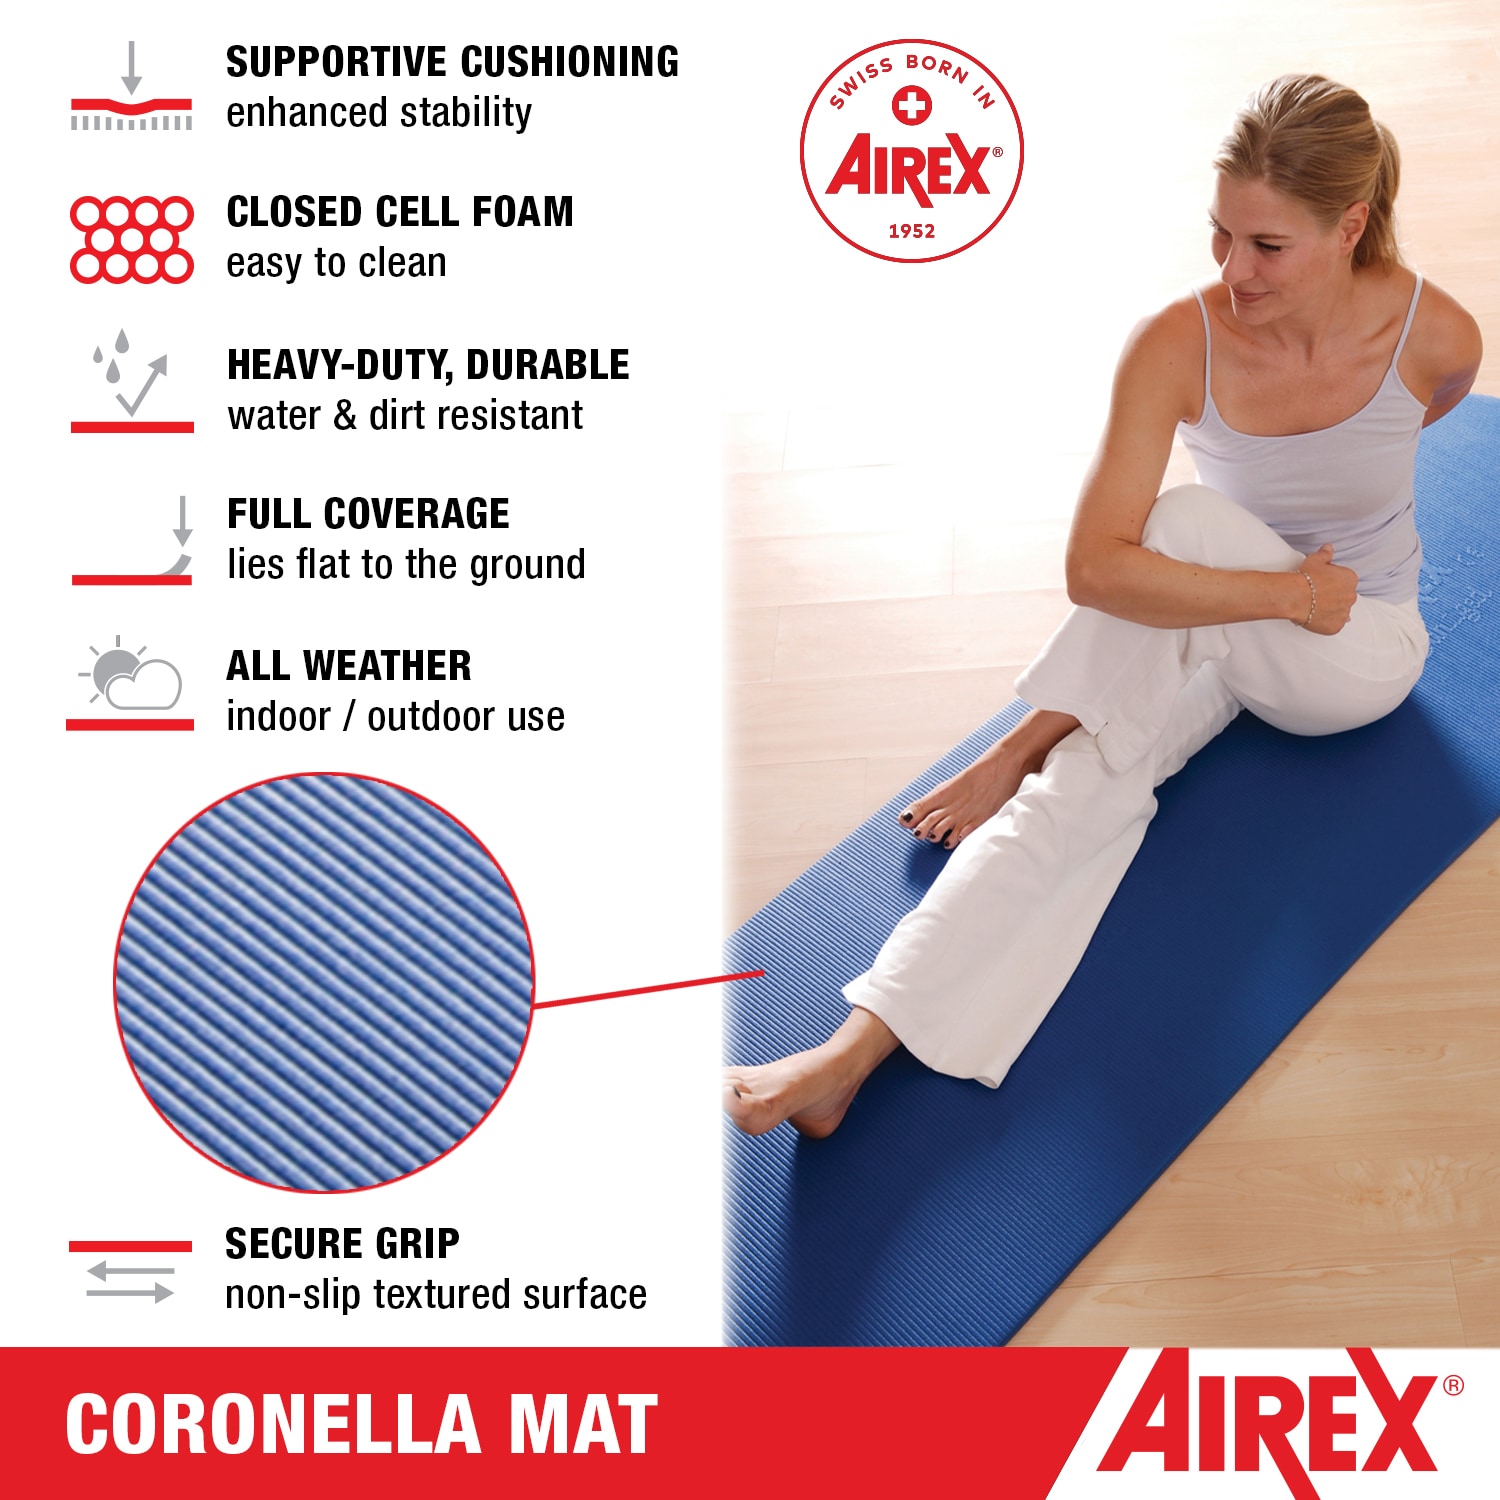 15-mm Yoga Mat in the Mats department at Lowes.com